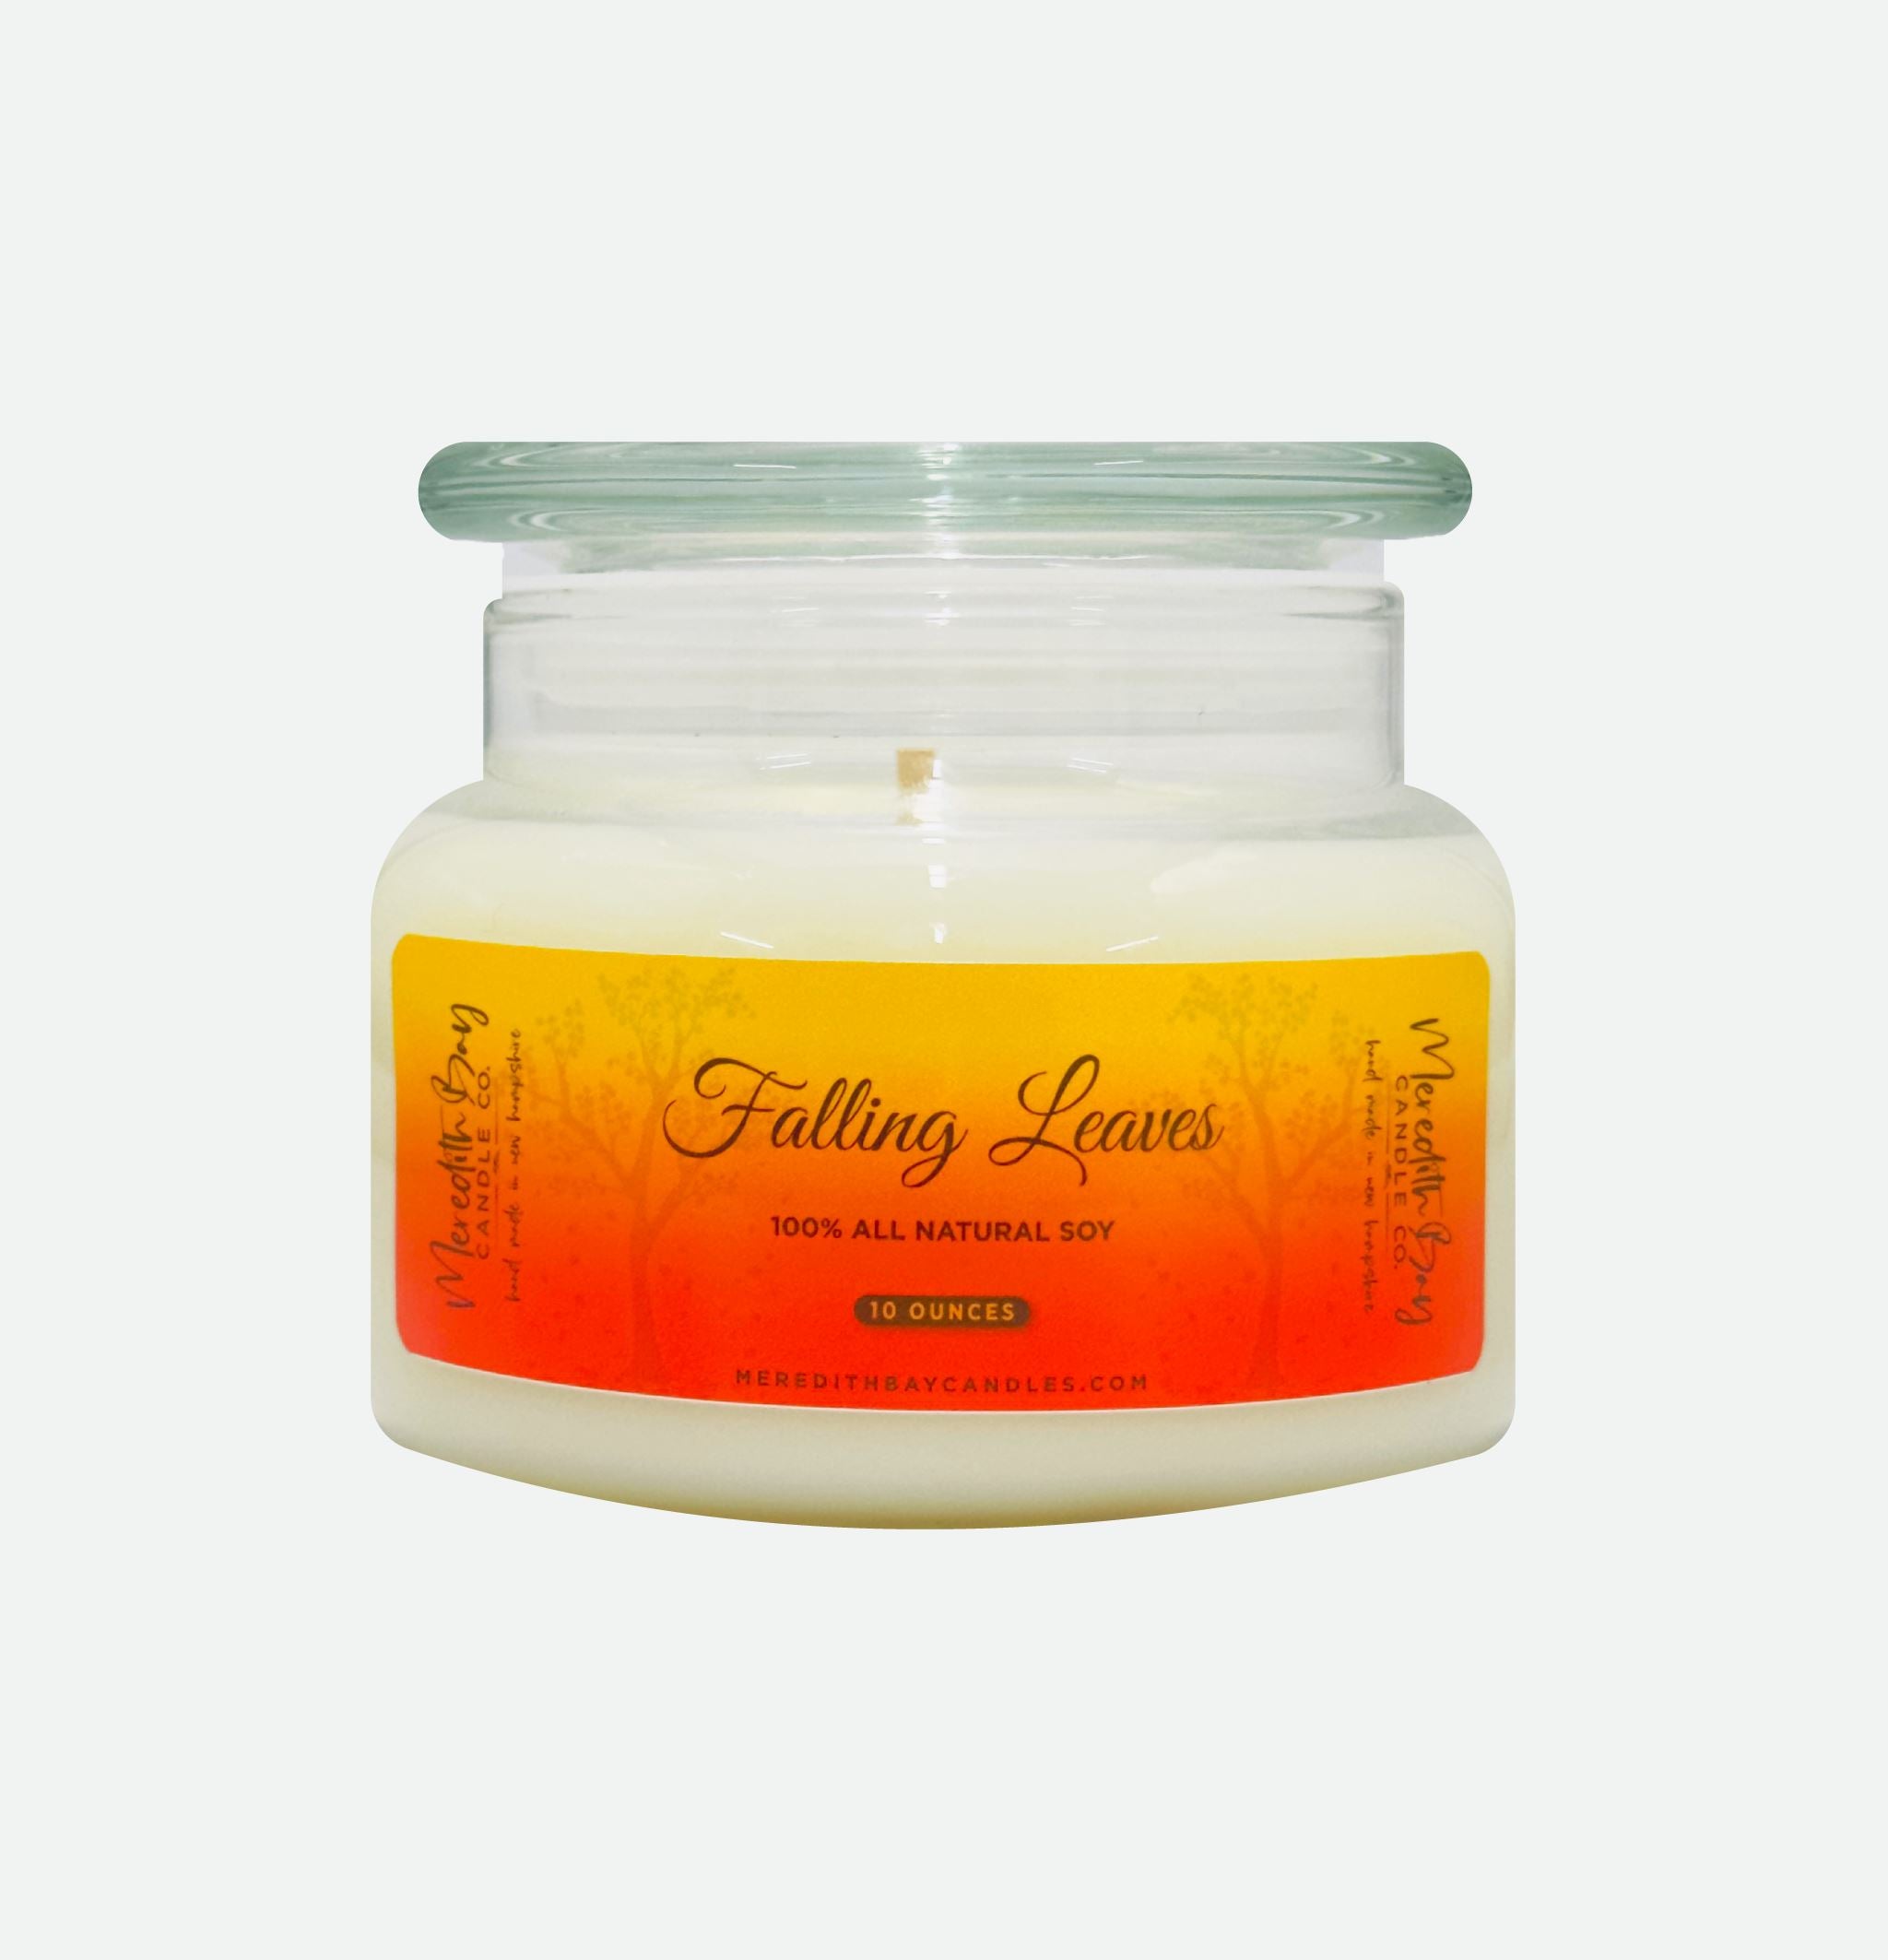 Falling Leaves Soy Candle Meredith Bay Candle Co 10 Oz 